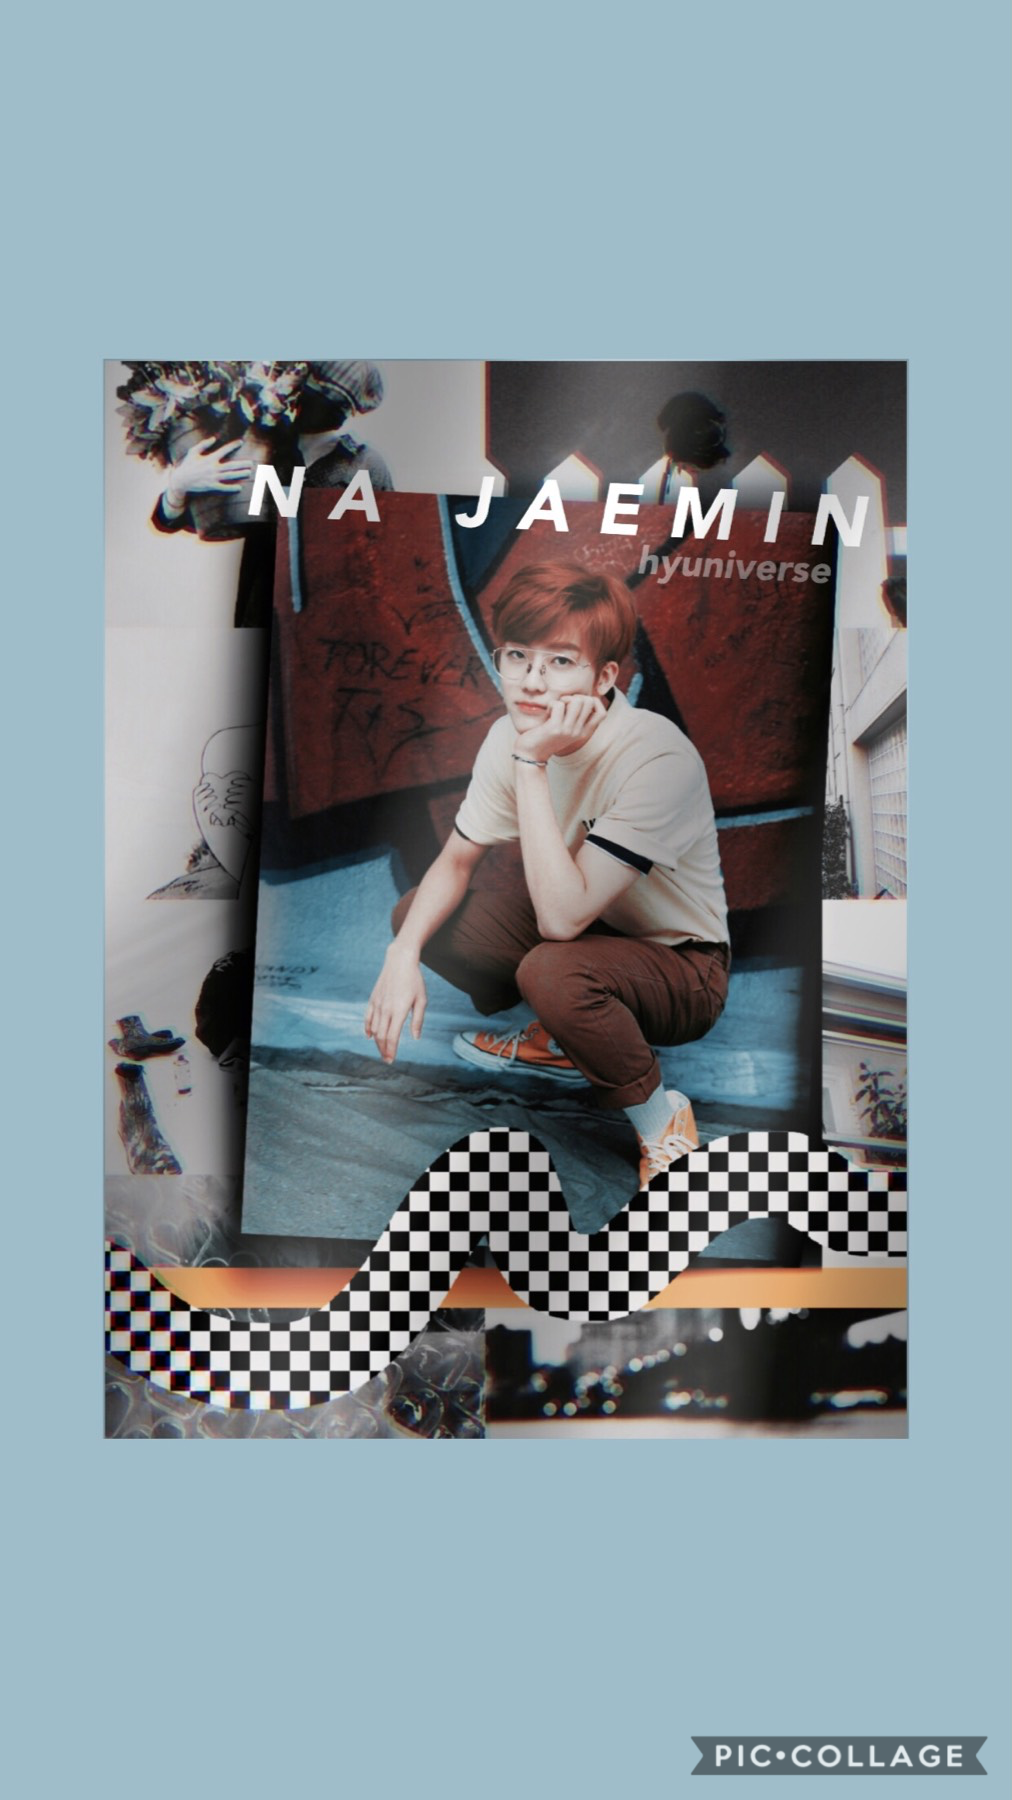 HAPPY BIRTHDAY NANA 💛 ↓
late but just wanted to say happy bday and thank you for being loving, hardworking, and a talented king. nctzens are with you, na jaemin